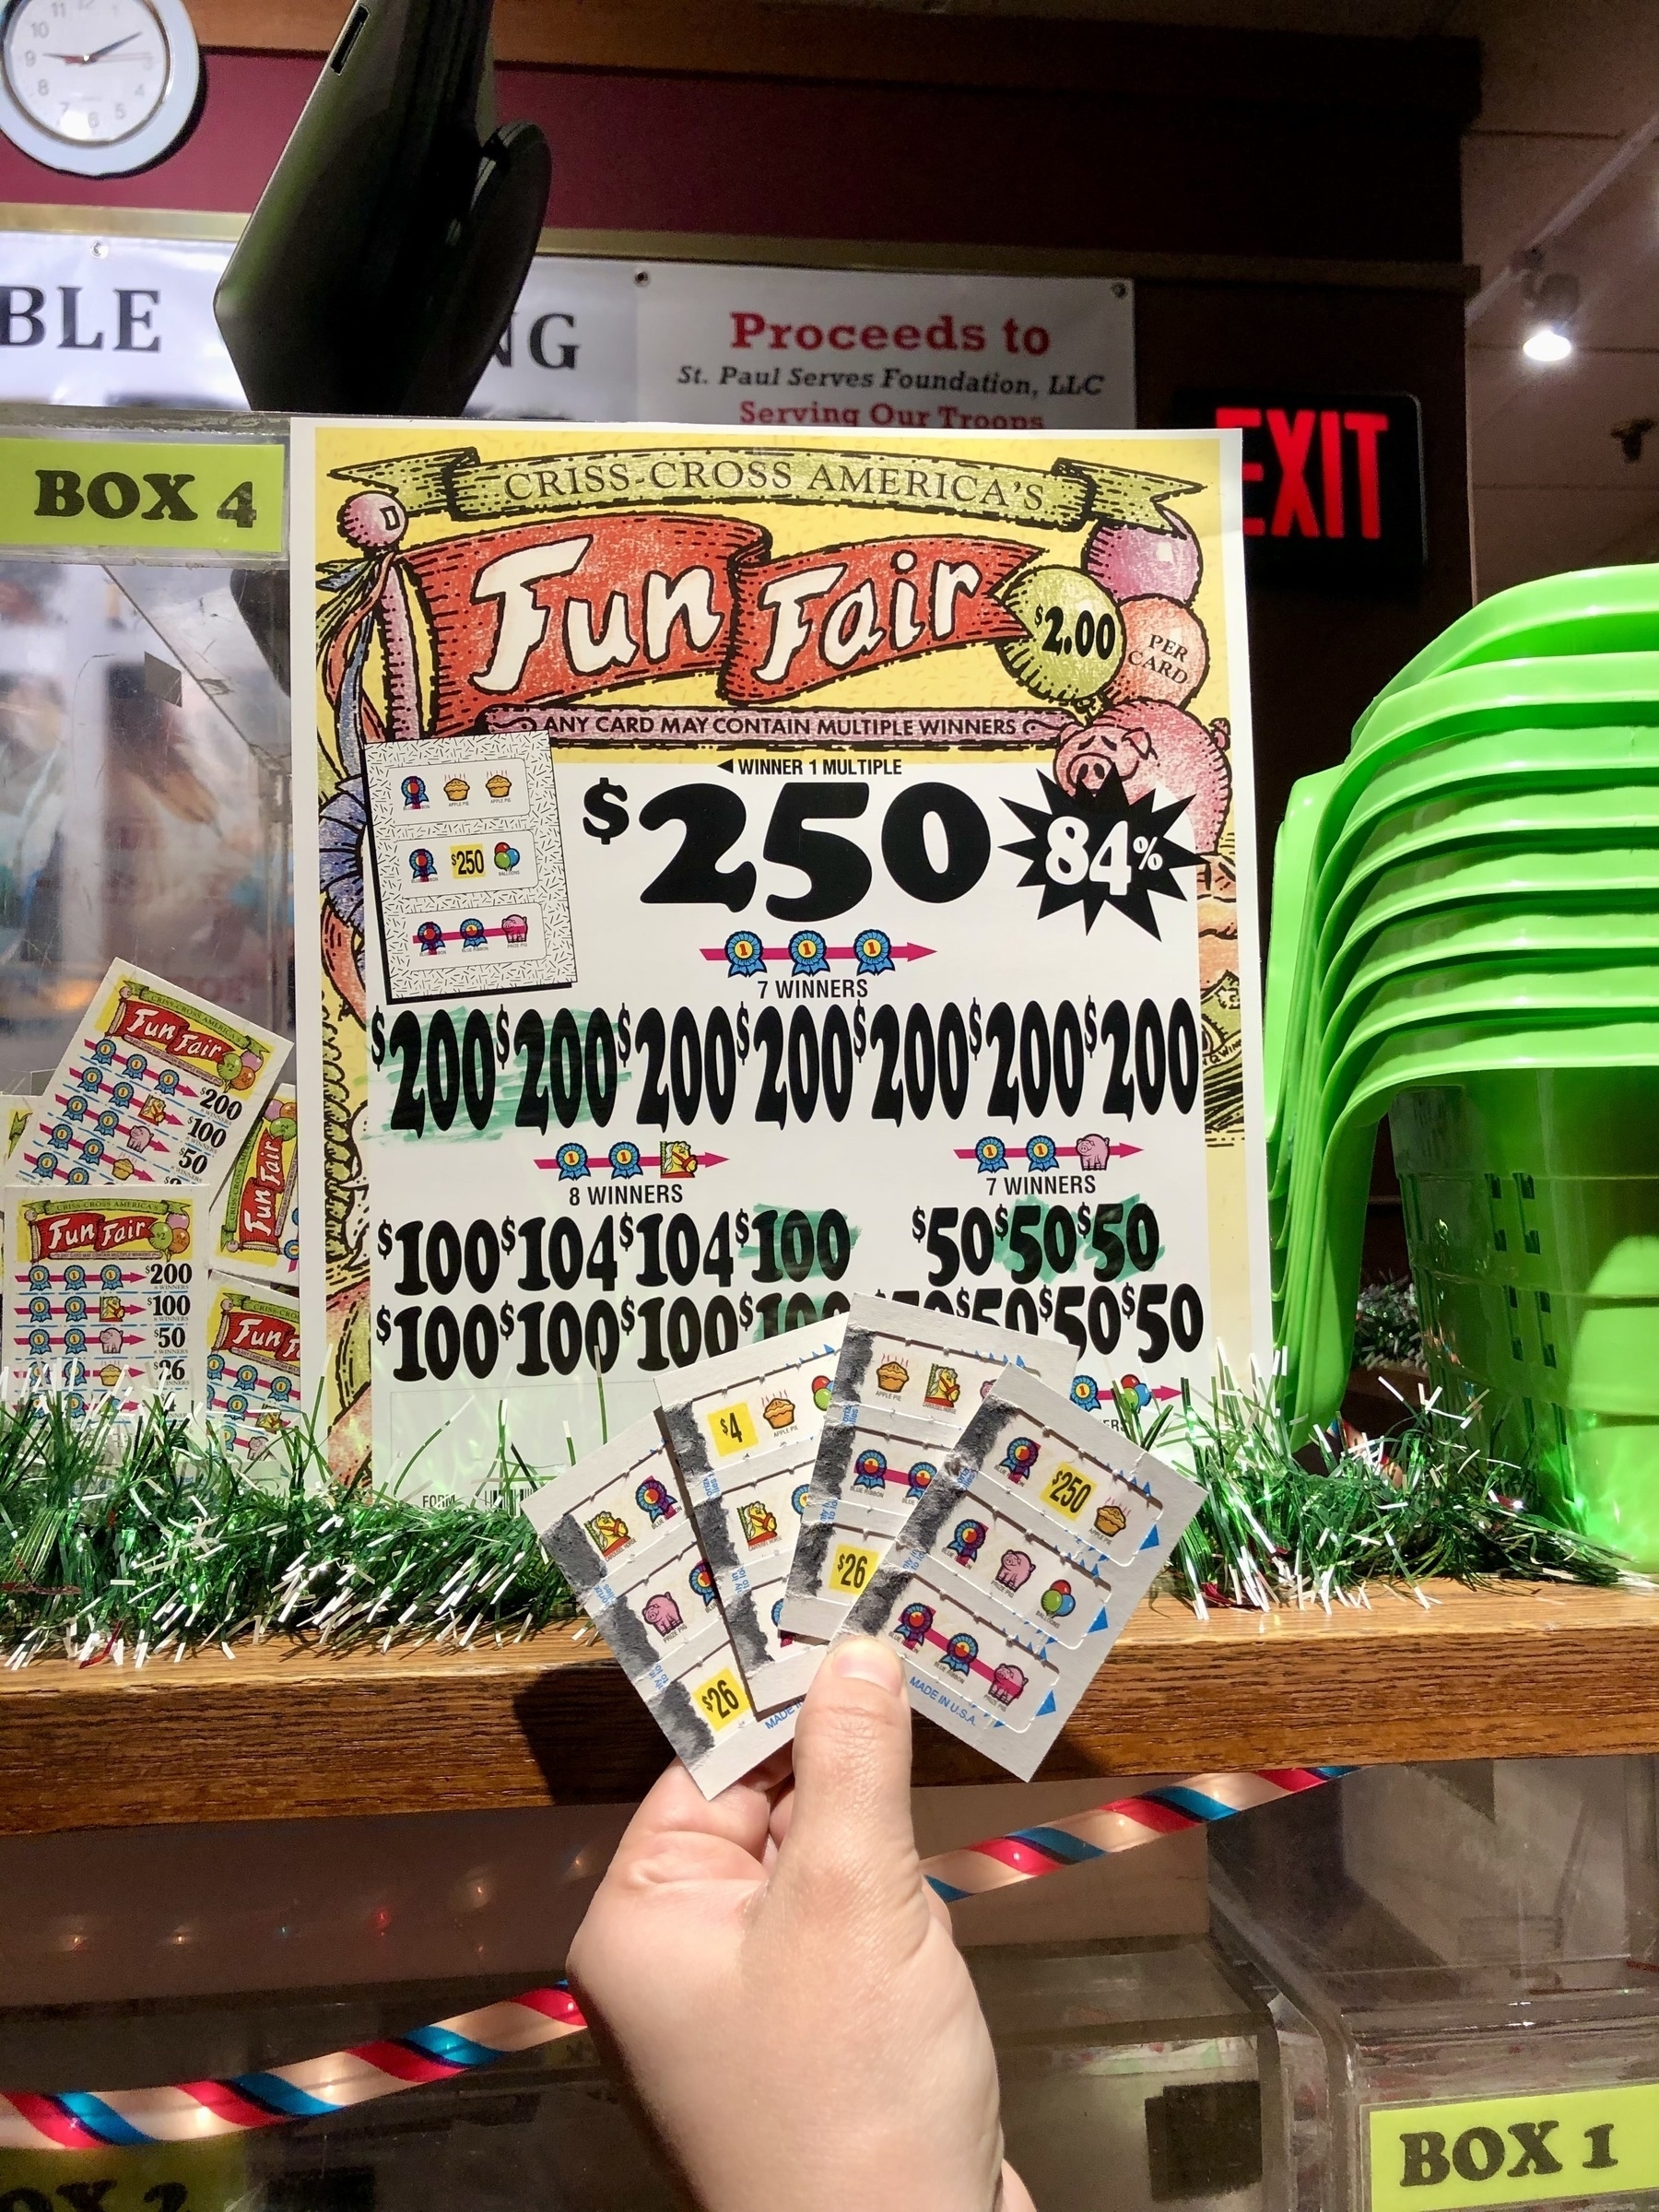 Fun Fair theme of pull-tabs, raised in a hand in front of the pull-tab kiosk